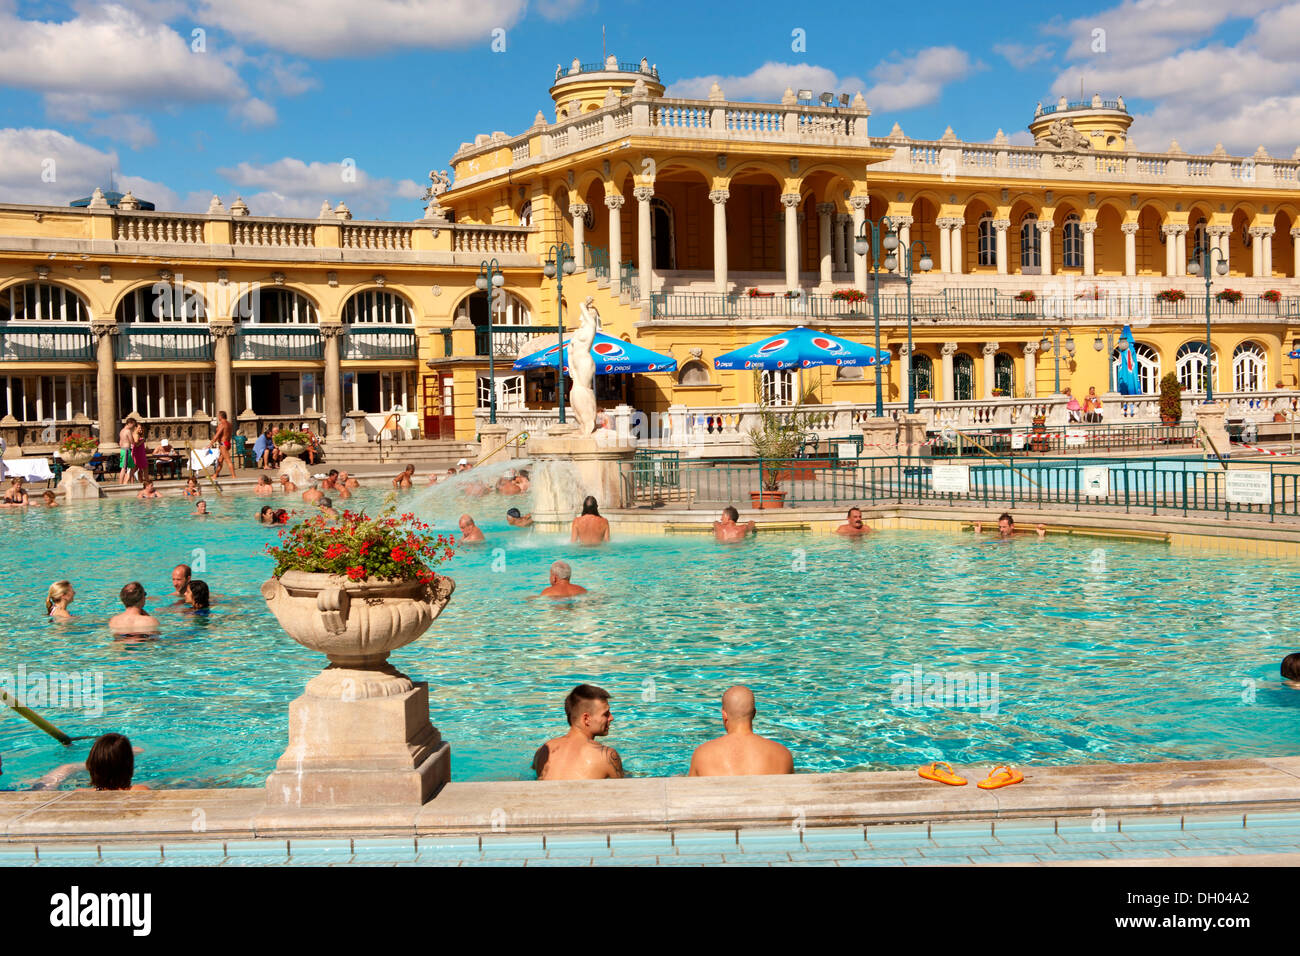 The Neo baroque Szechenyi baths, the largest medicinal thermal baths in Europe, City Park, Budapest, Hungary, Europe Stock Photo